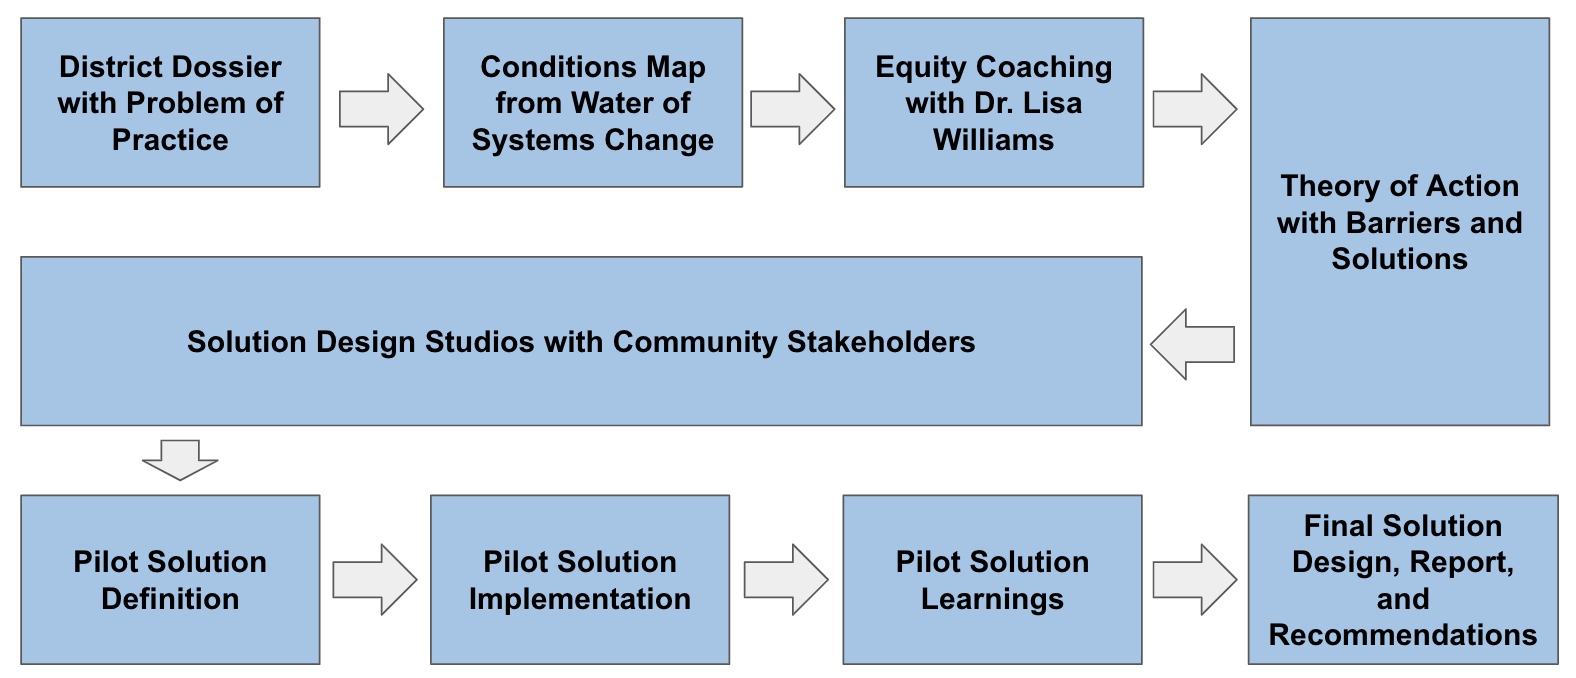 Project Journey Map: "District Dossier with problem of Practice" to "conditions Map from Water of Systems Change" to Equity Coaching with Dr. Lisa Williams" to Theory of action with Barriers and Solutions" to Solution Design Studios with Community Stakeholders" to Pilot Solution Definition" to Pilot Solution Implementation" to Pilot Solution Learnings" to Final Solution Design, Report, and Recommendations"